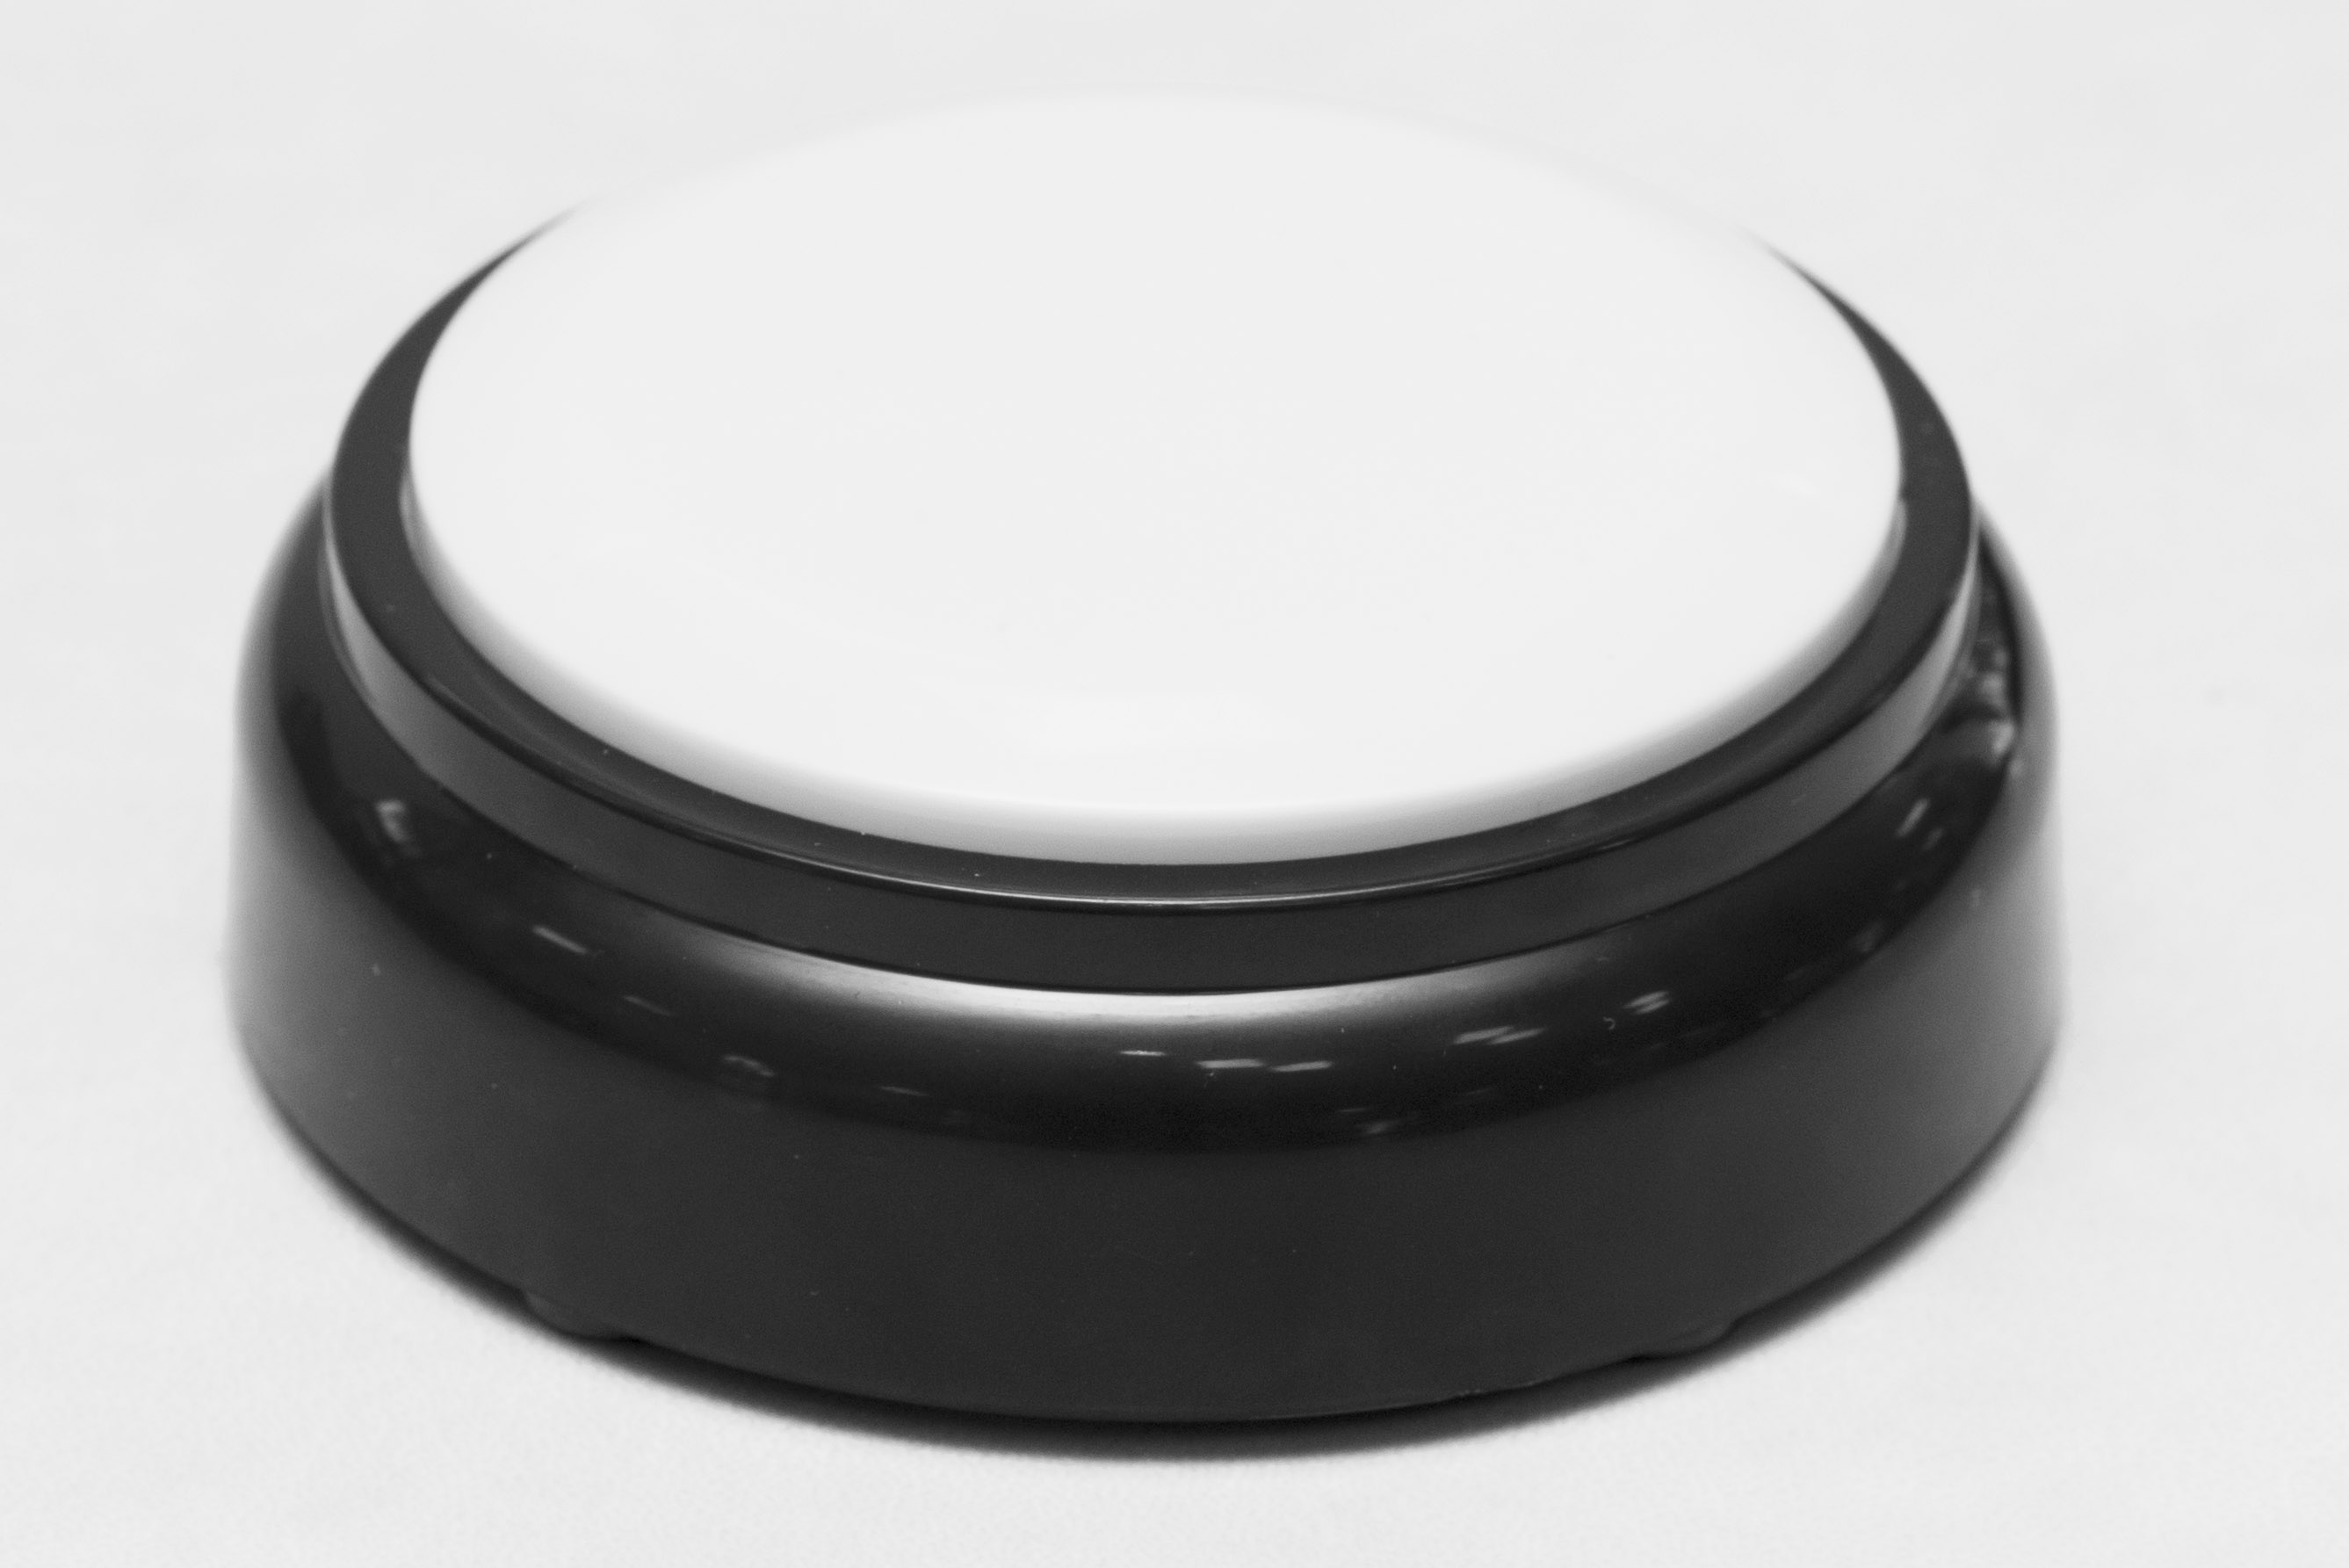 A white button on a black base, in the shape of a hockey puck.